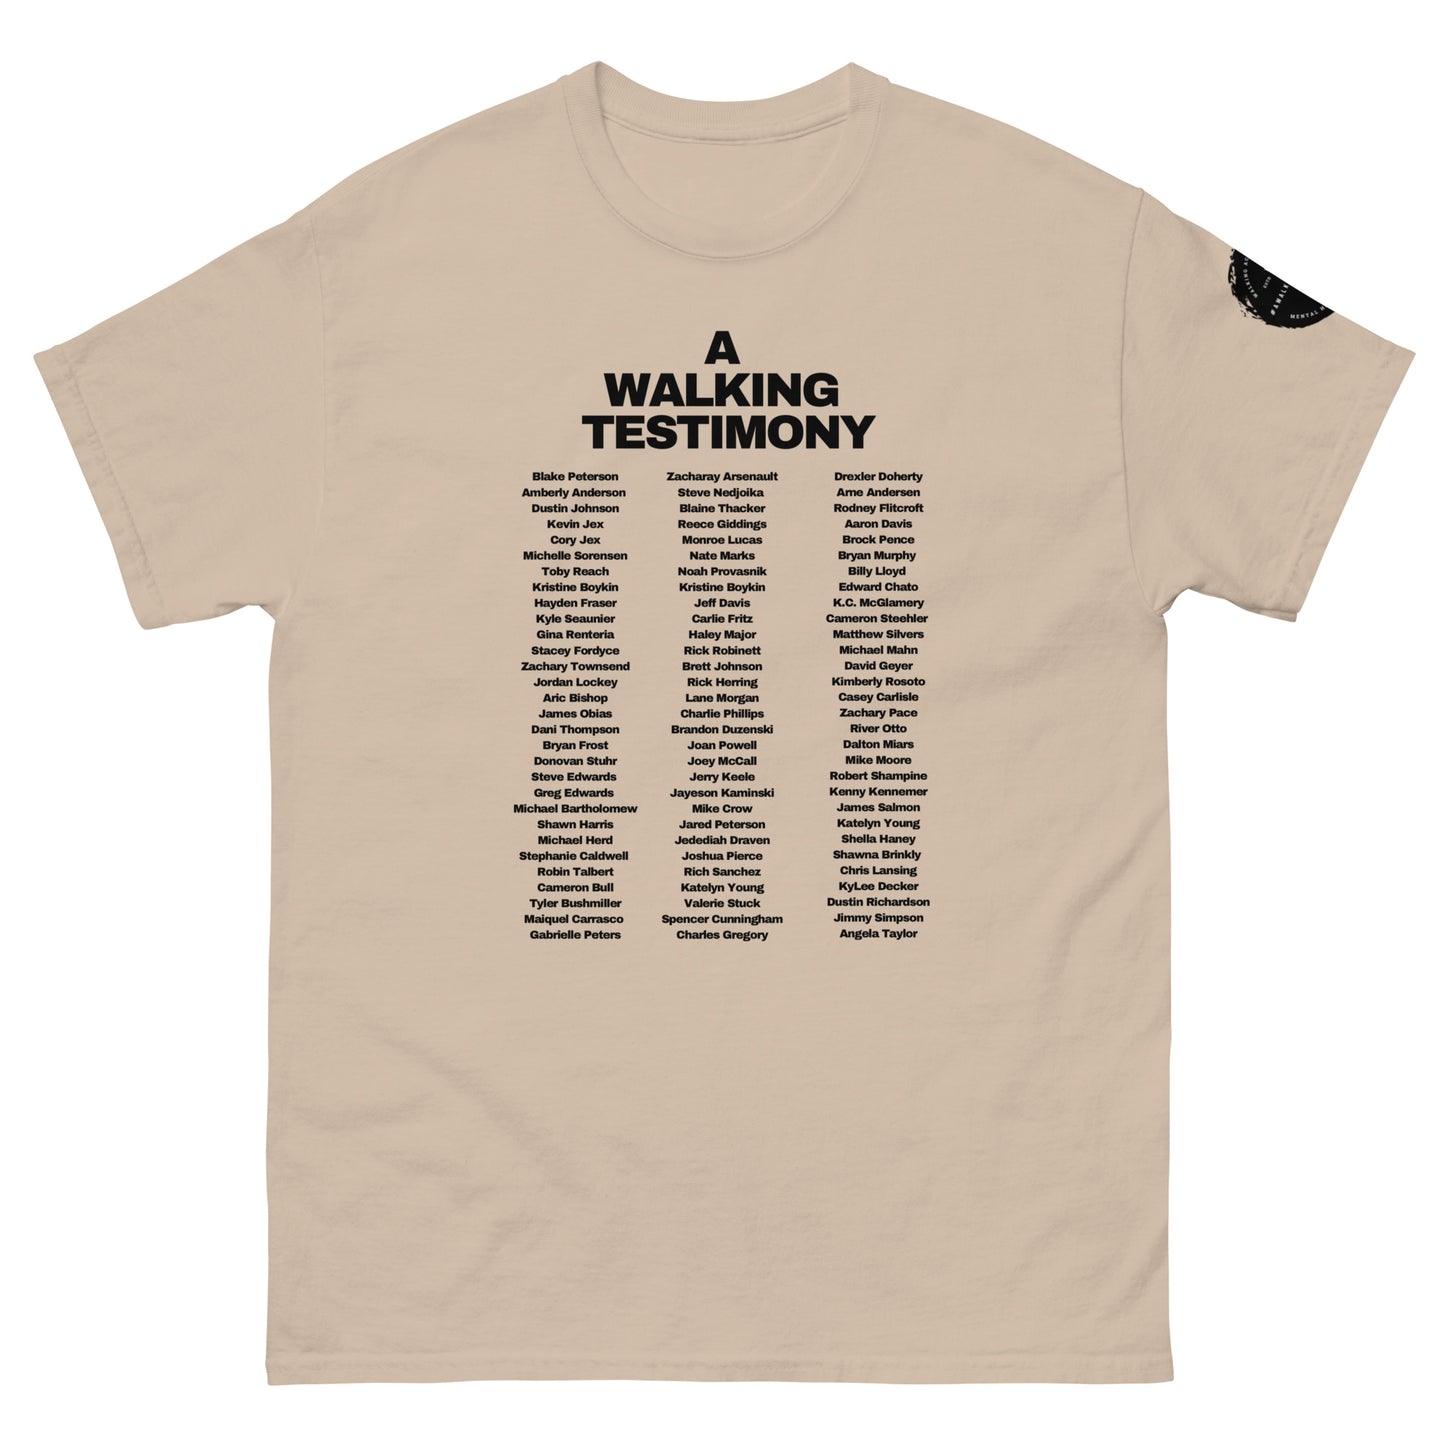 Official A Walking Testimony shirt Edition 5 (light colors)